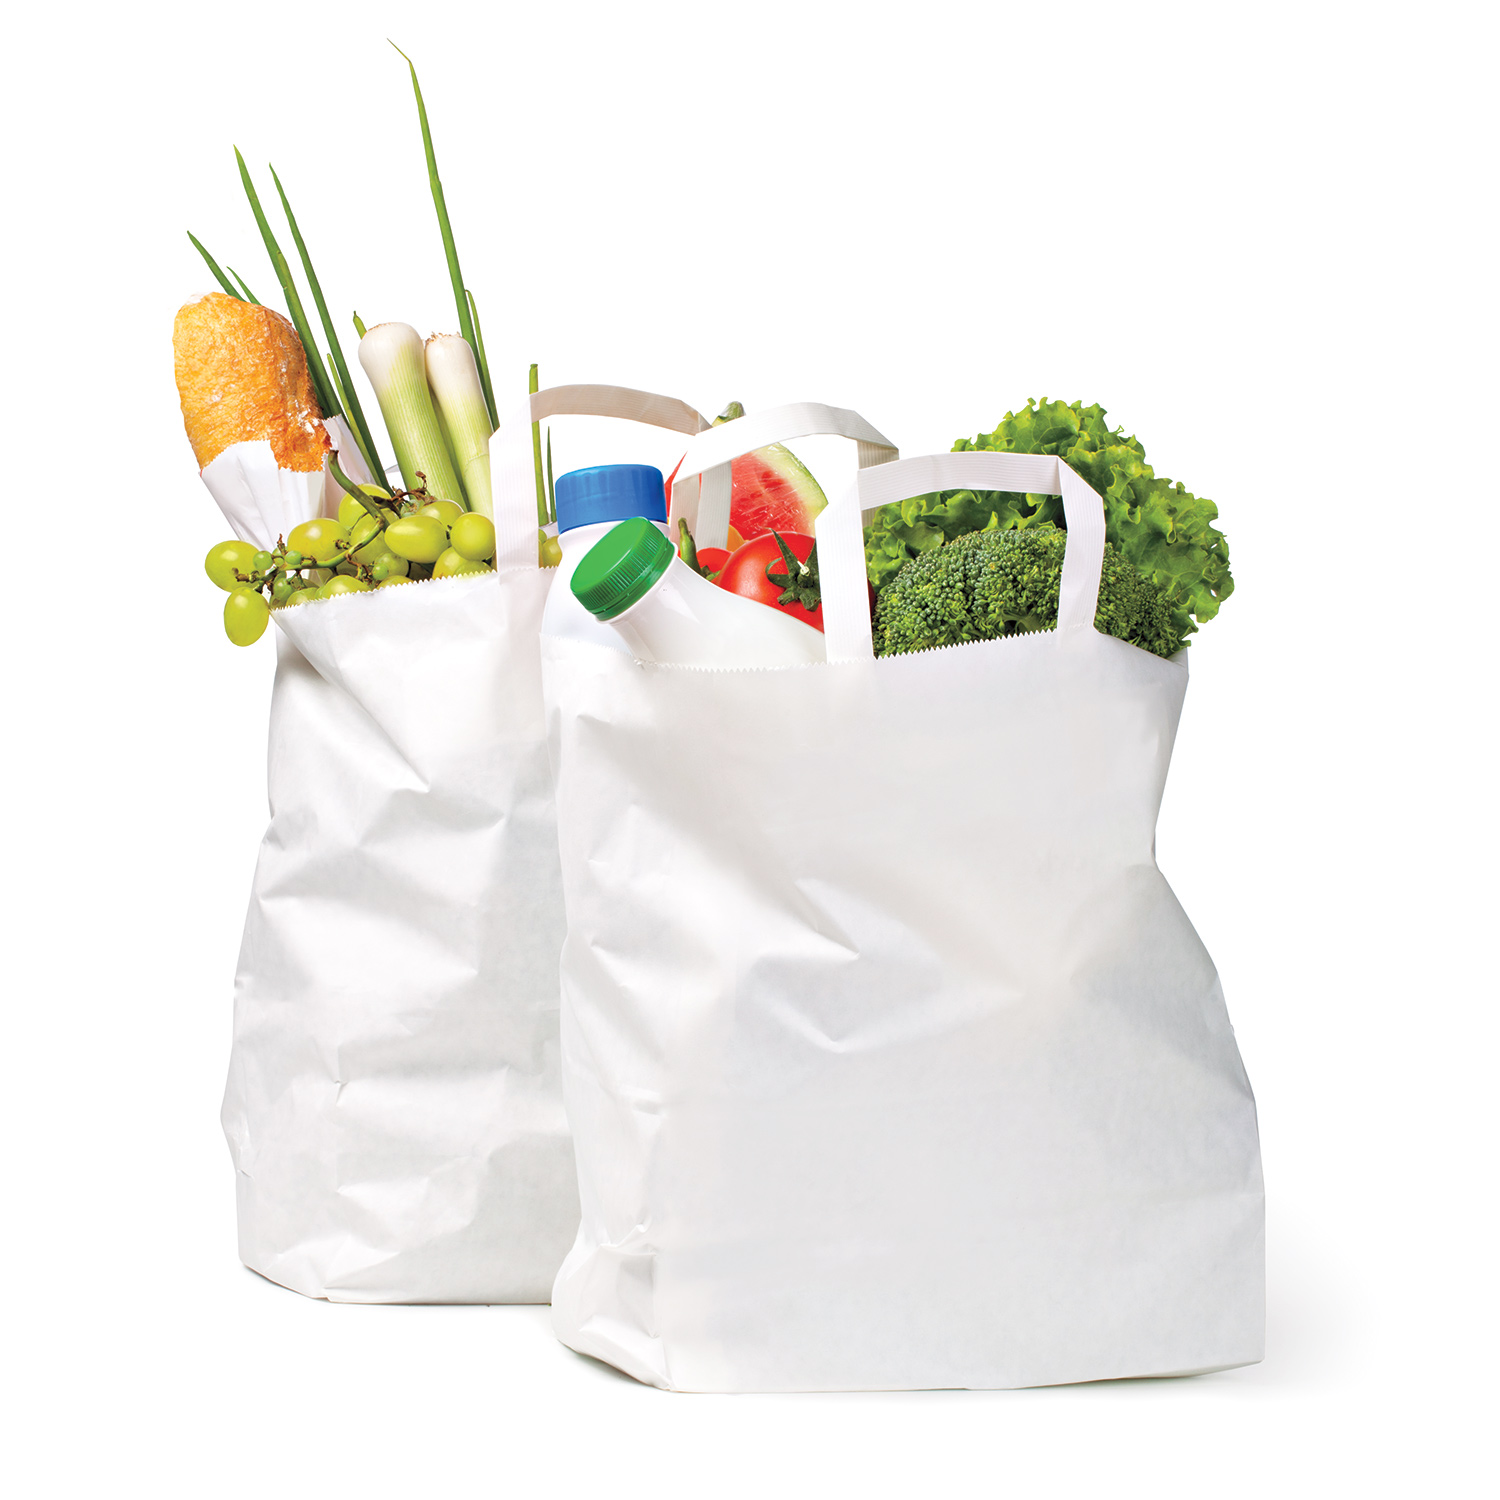 A photo of white grocery bags